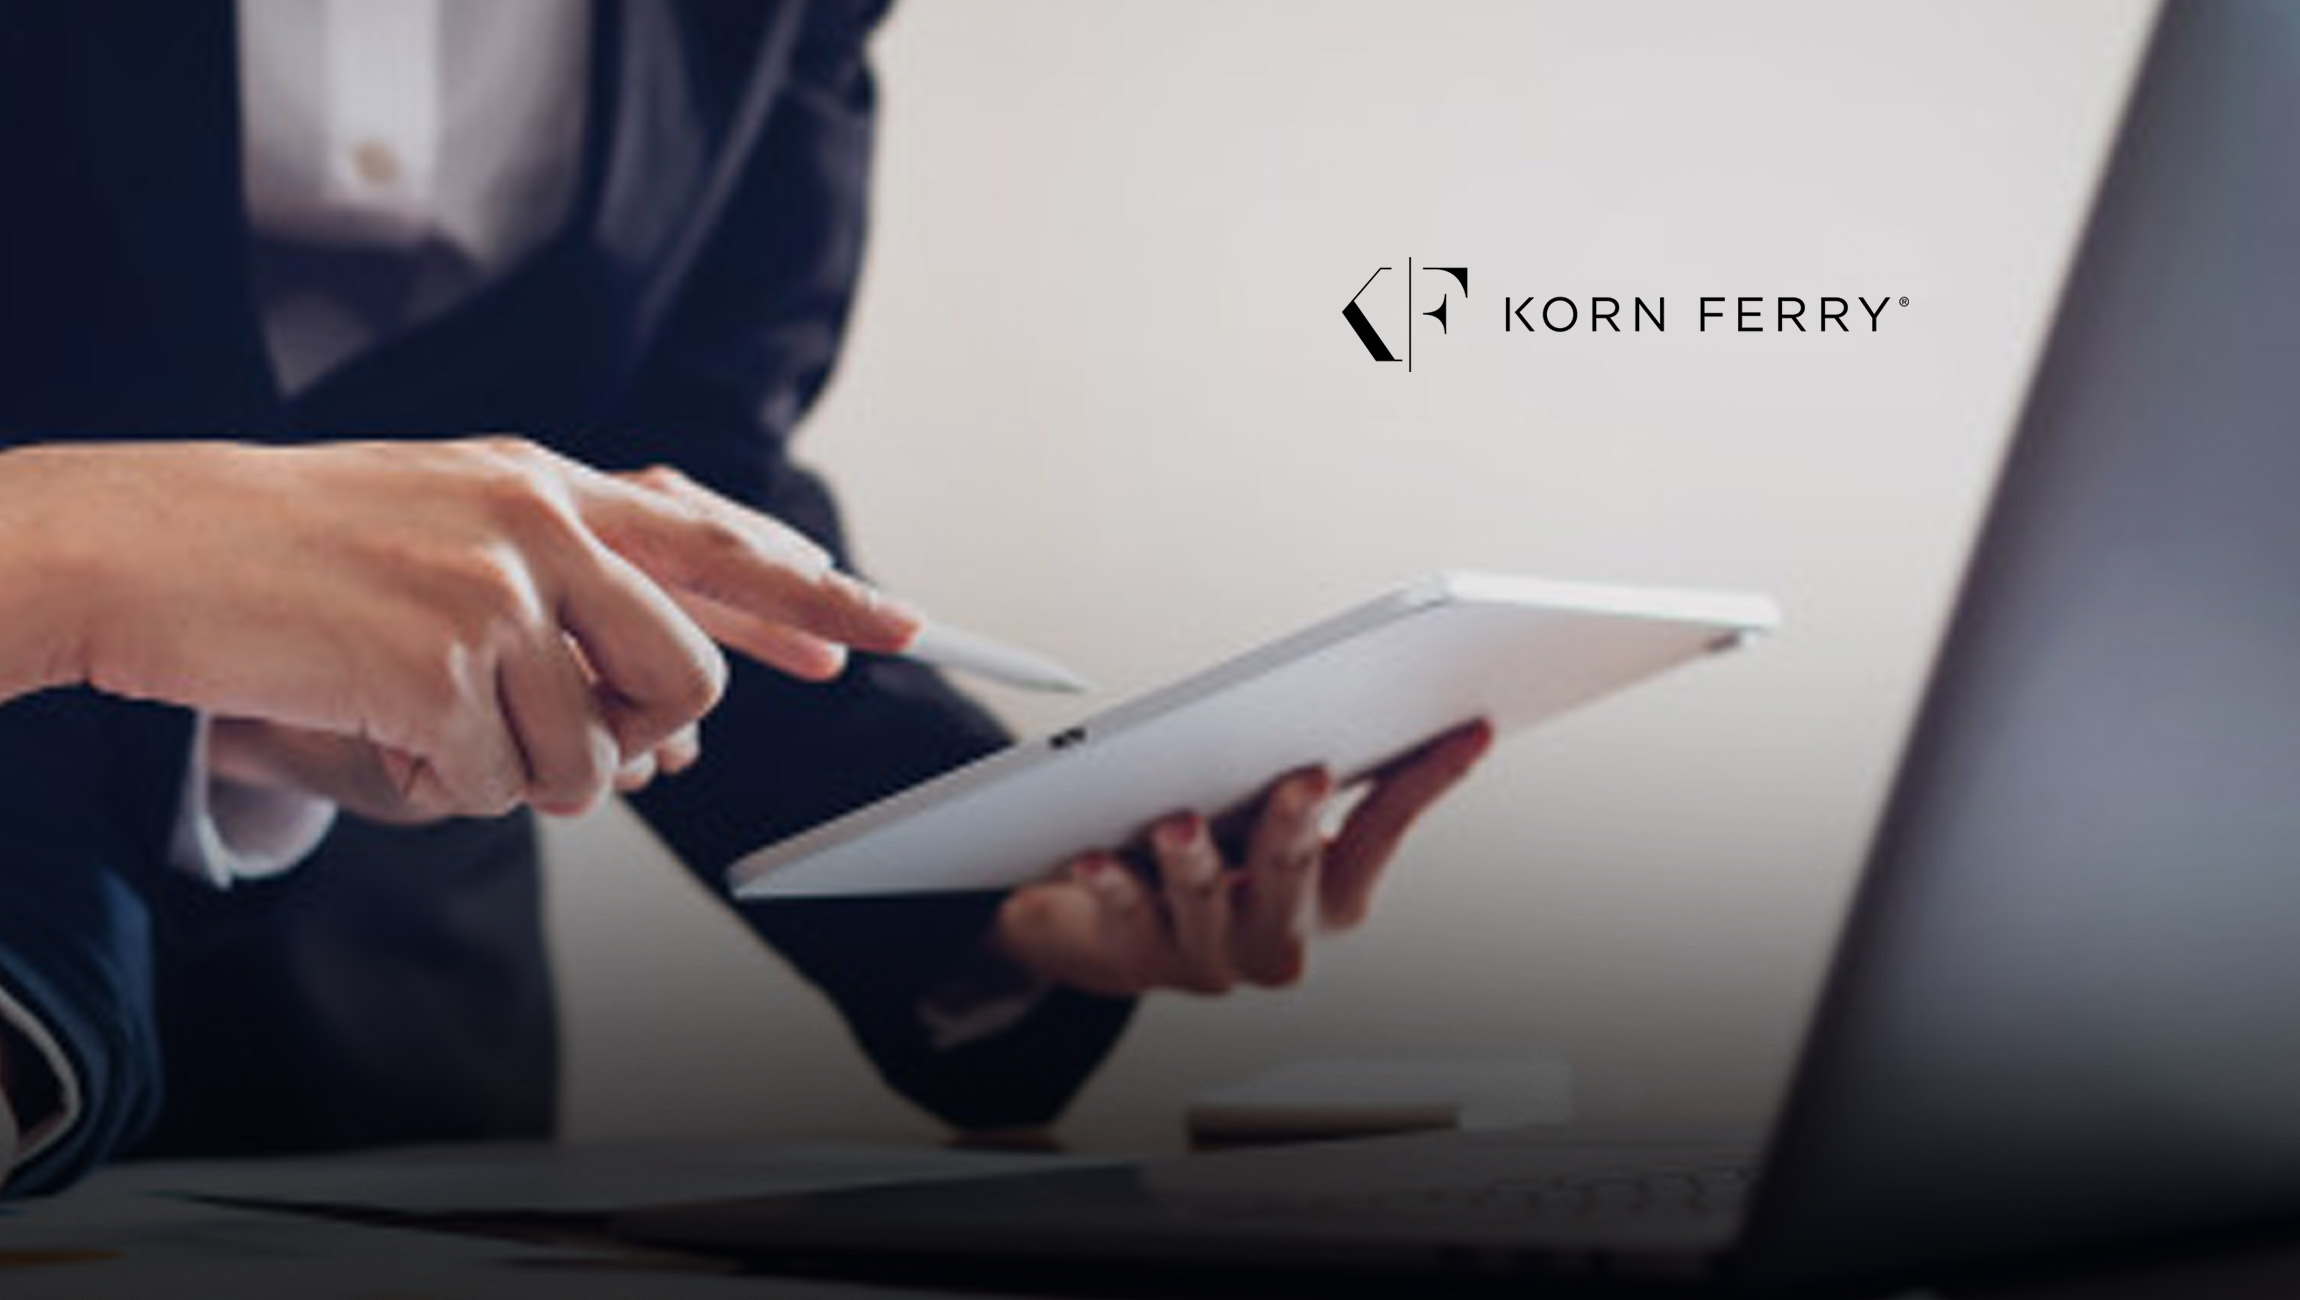 Korn Ferry Recognized As A Leader In Recruitment Process Outsourcing